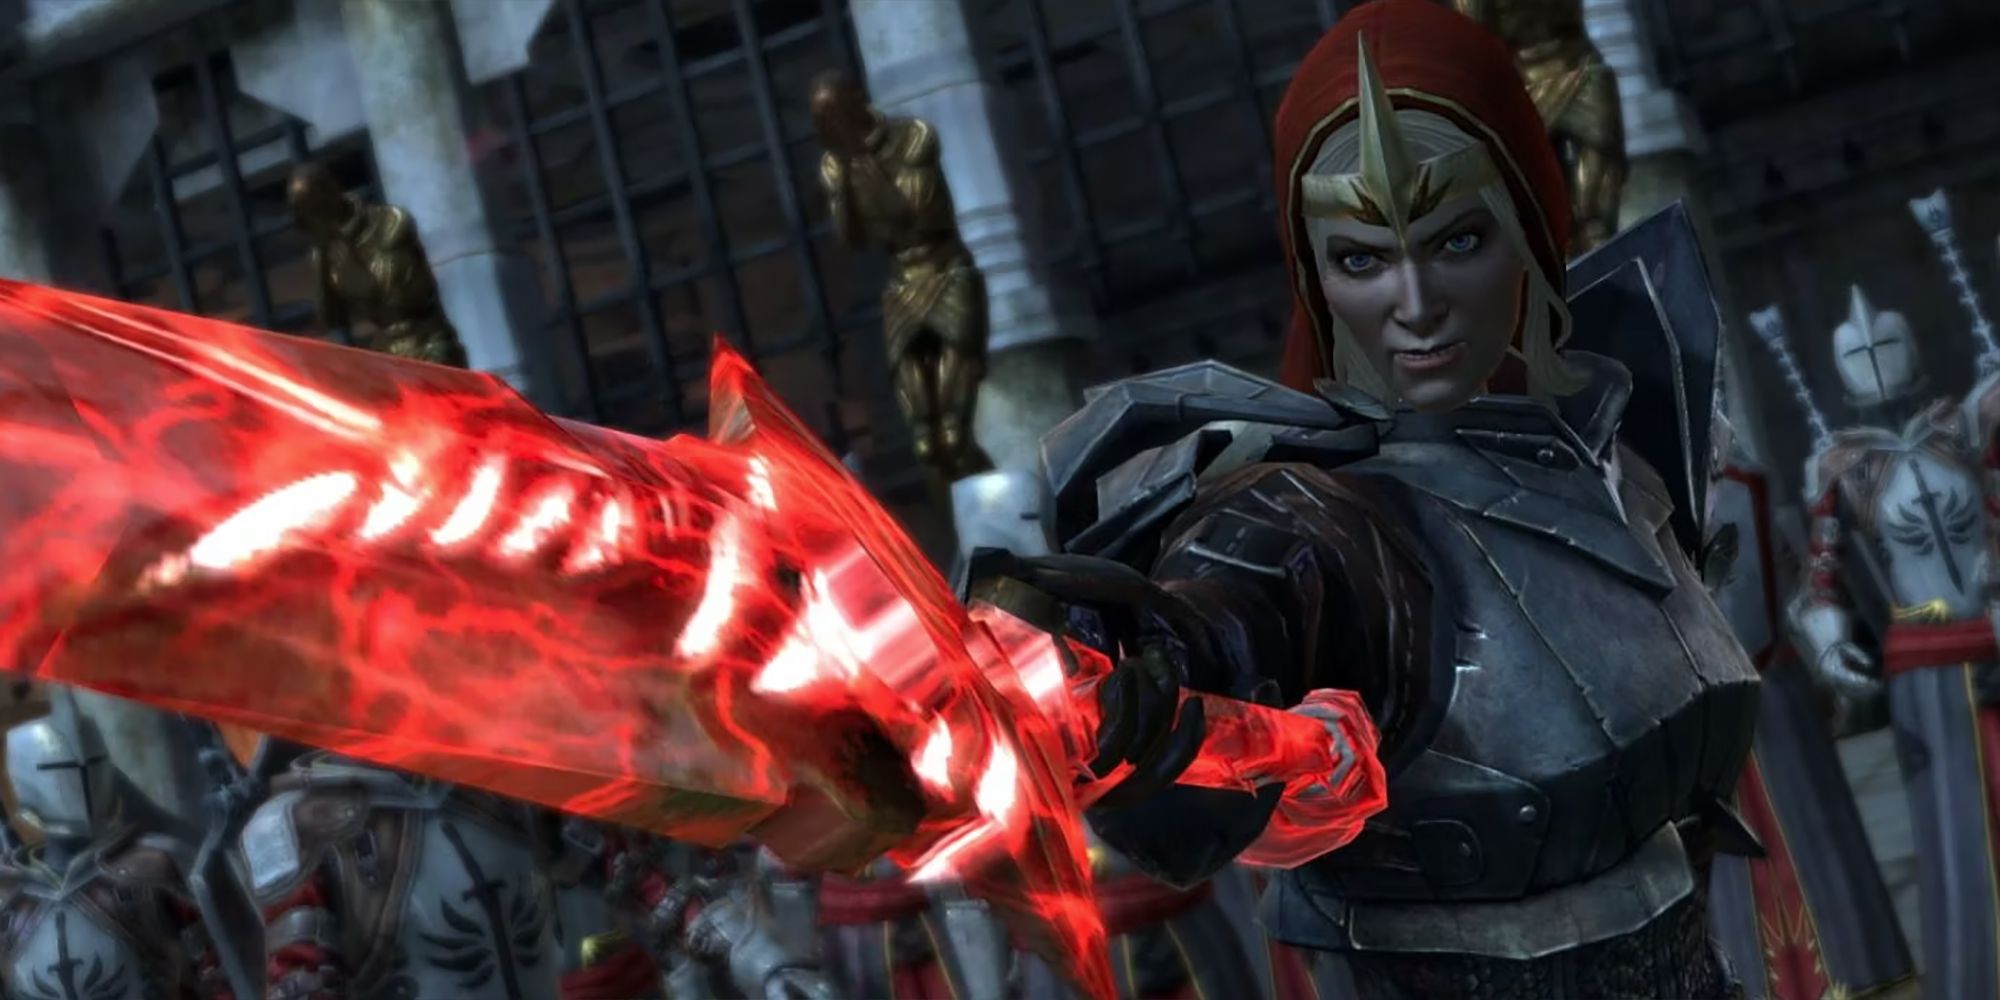 Meredith Stannard In Dragon Age 2